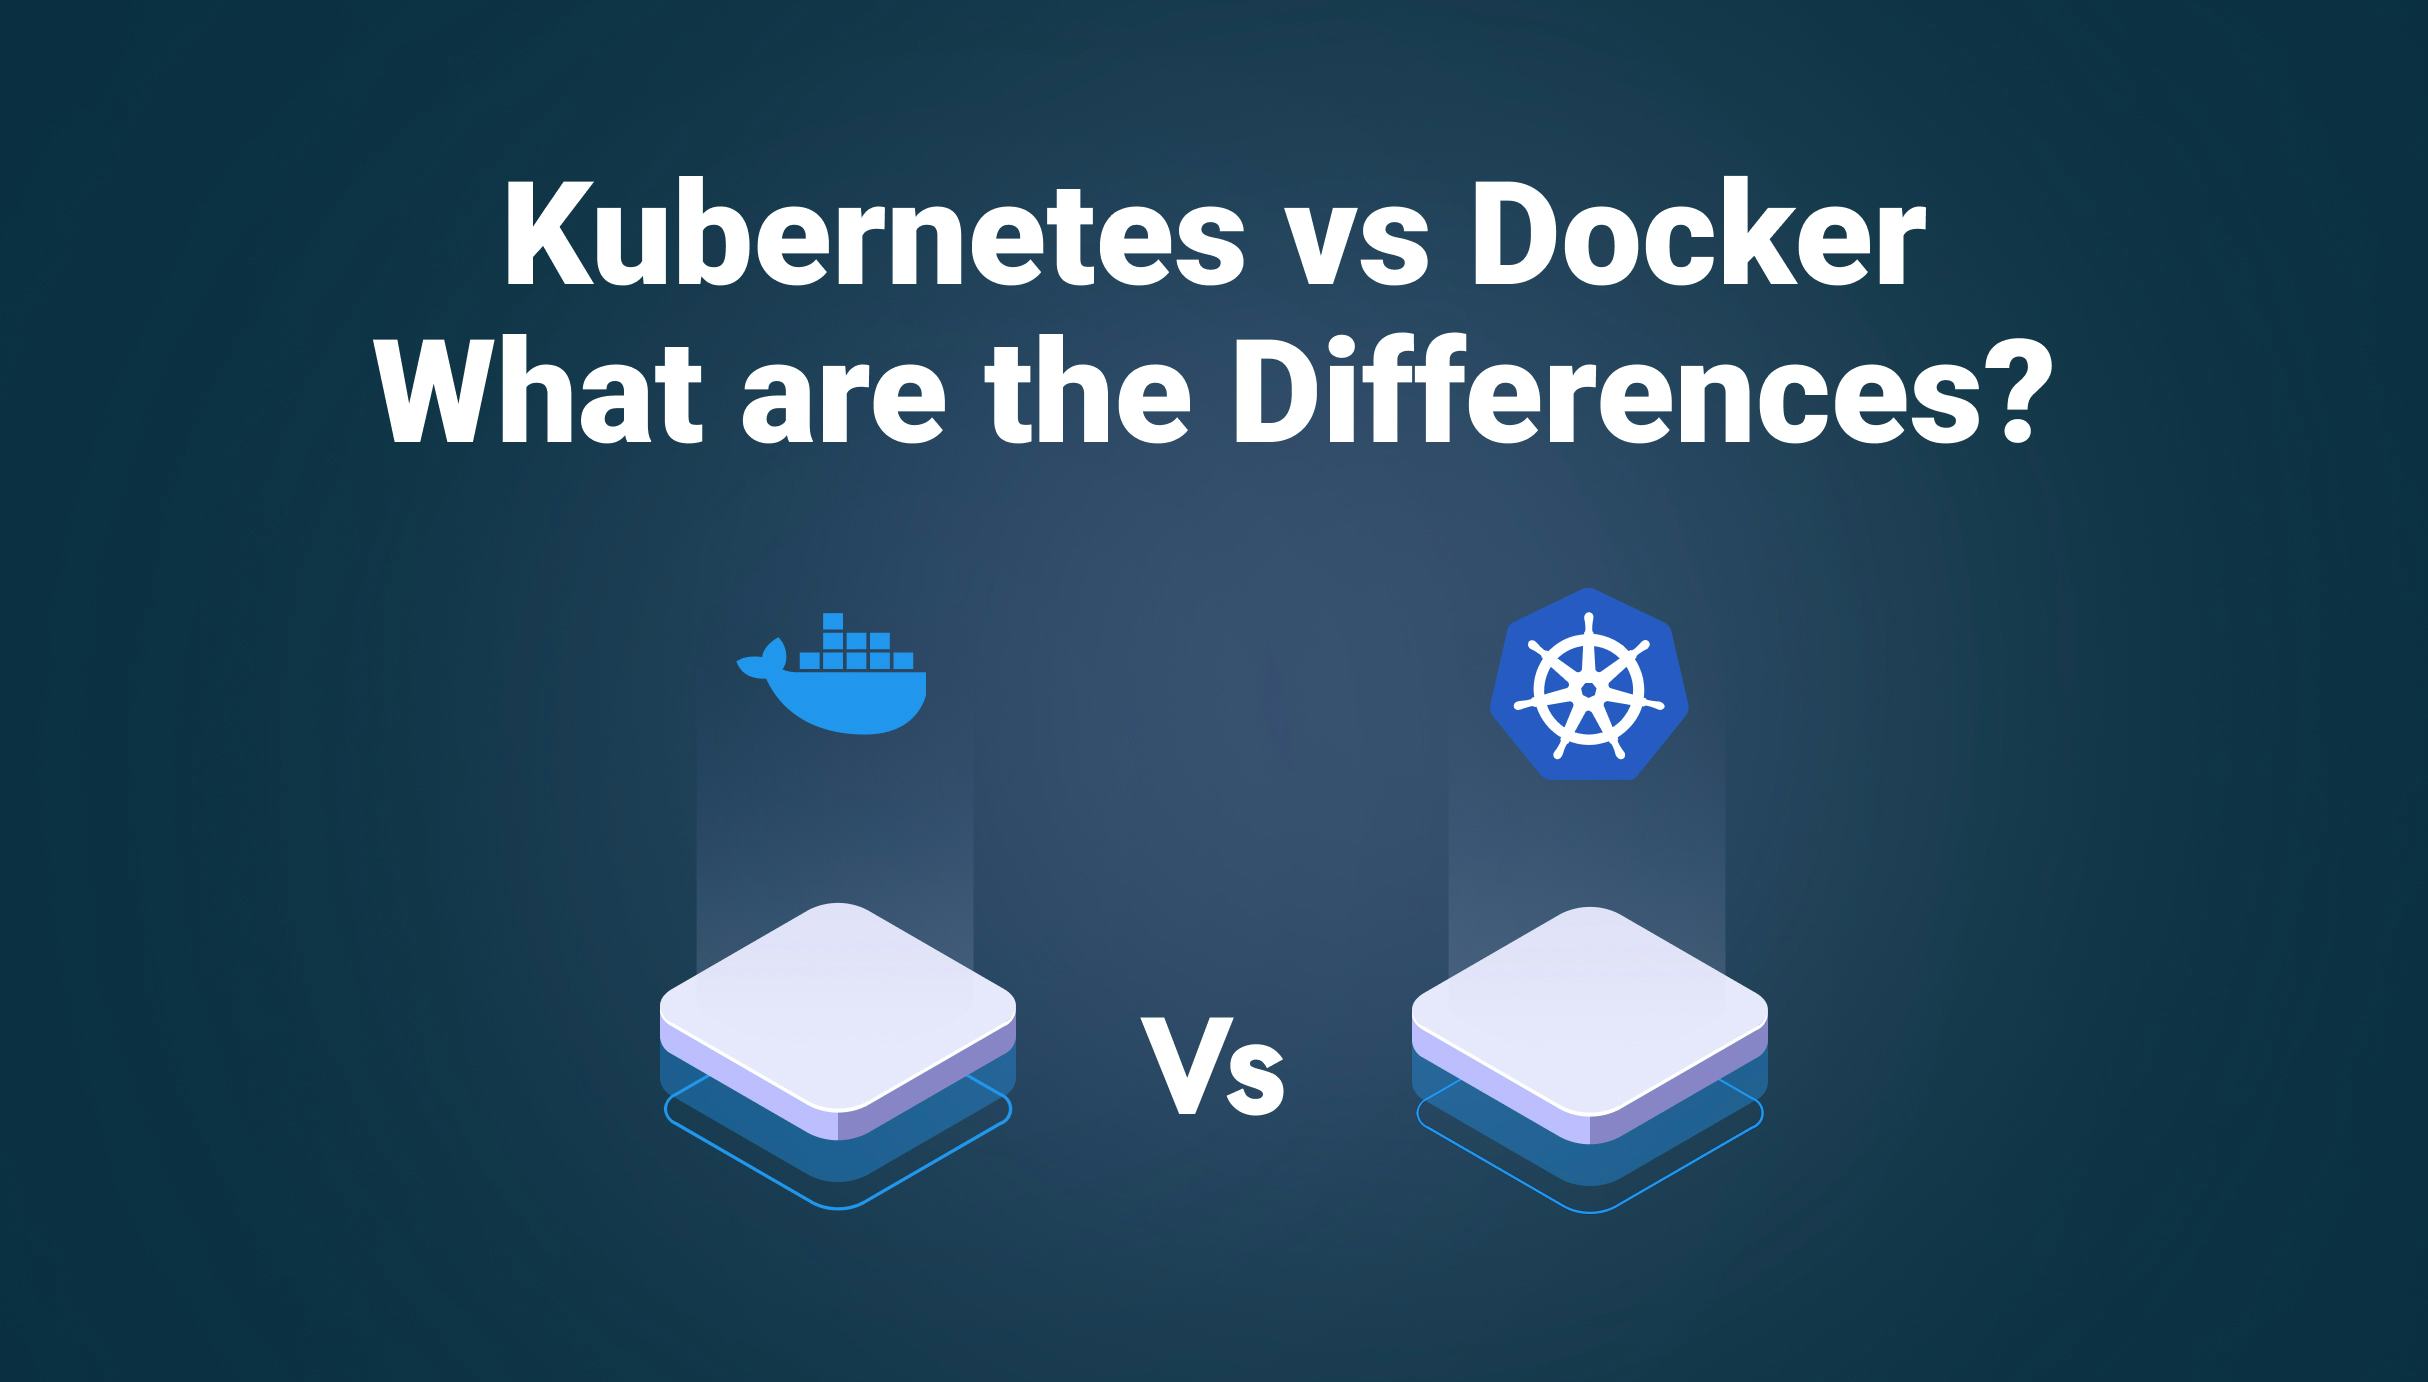 Kubernetes vs Docker: What are the Differences? - Qovery